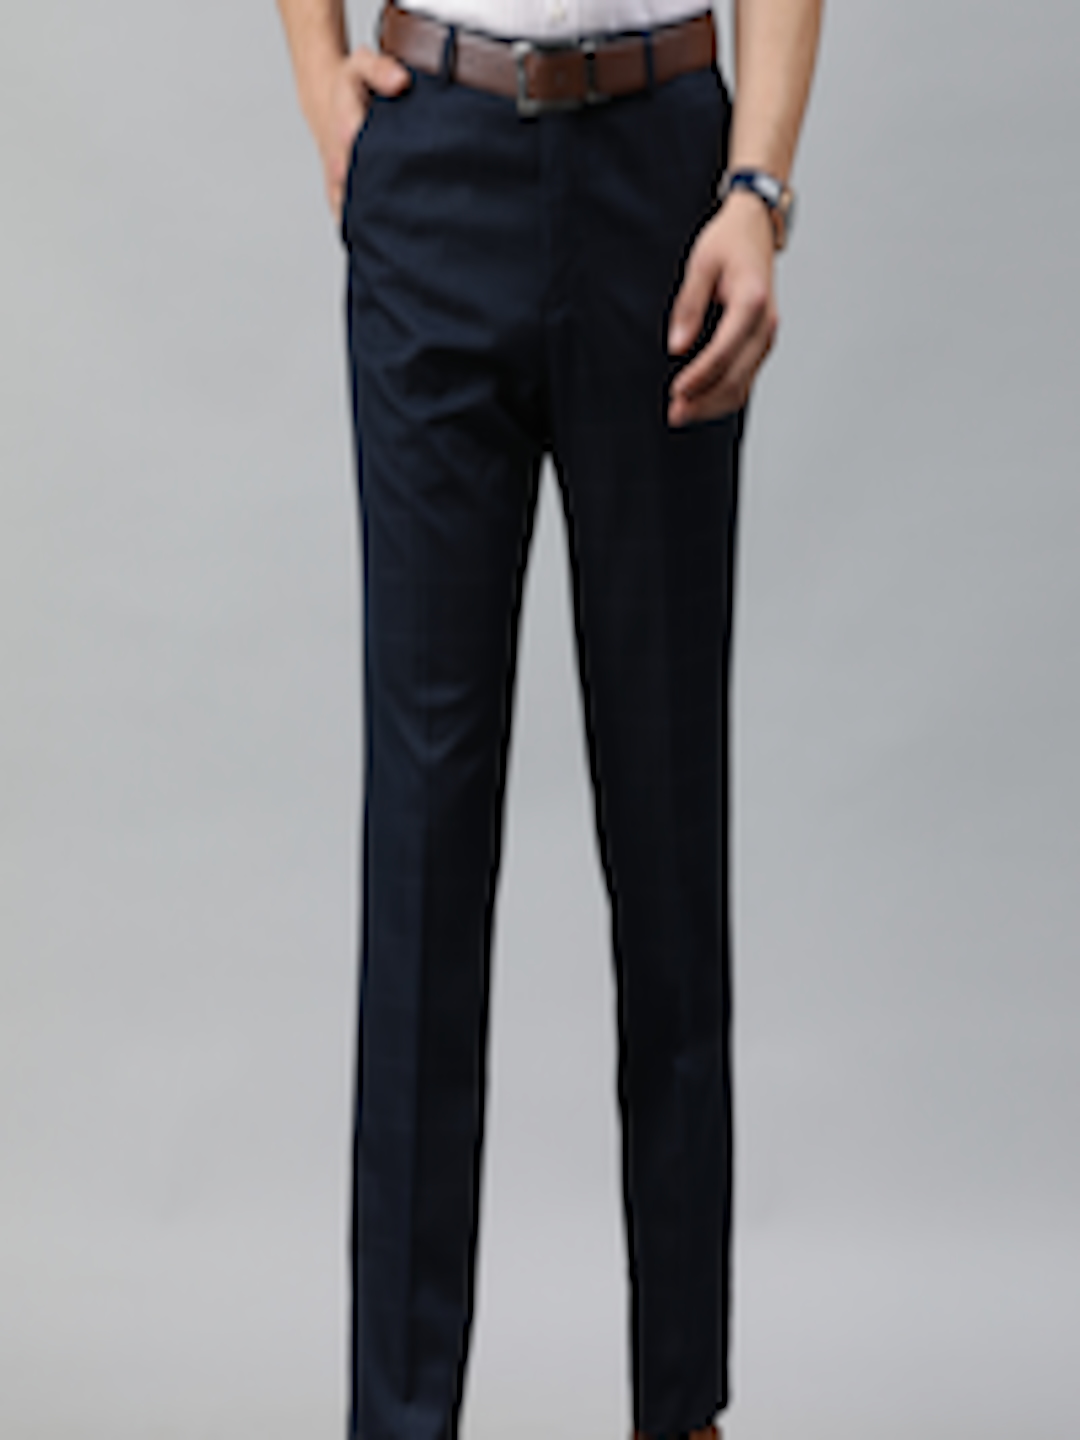 Buy Arrow Men Navy Blue Tapered Fit Checked Formal Trousers - Trousers ...